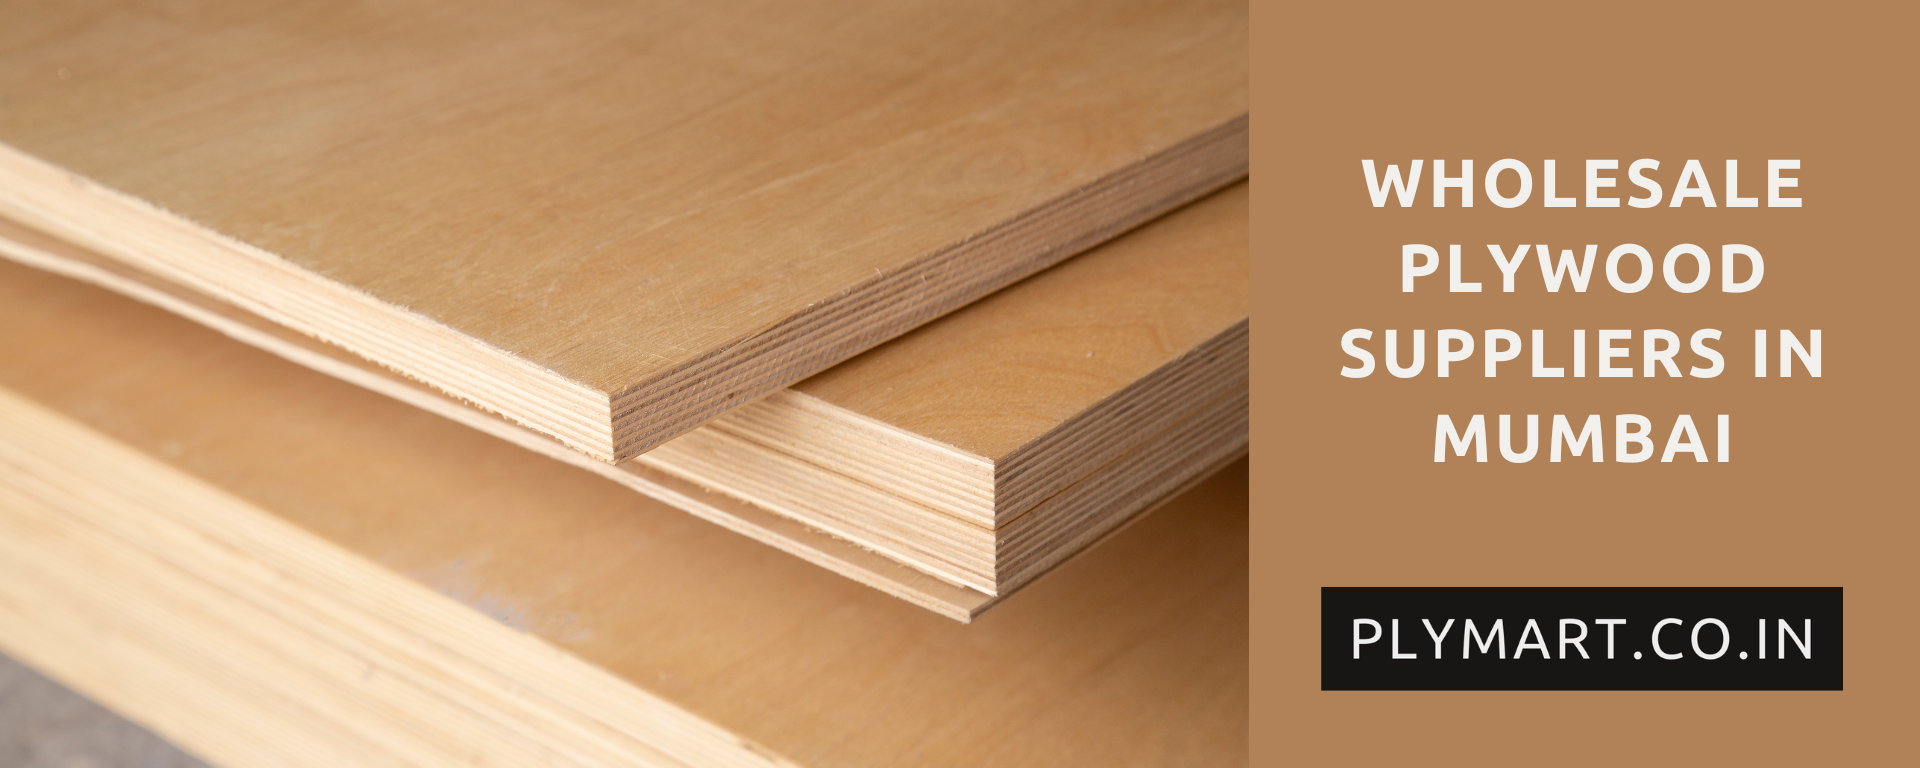 Wholesale plywood suppliers In Mumbai